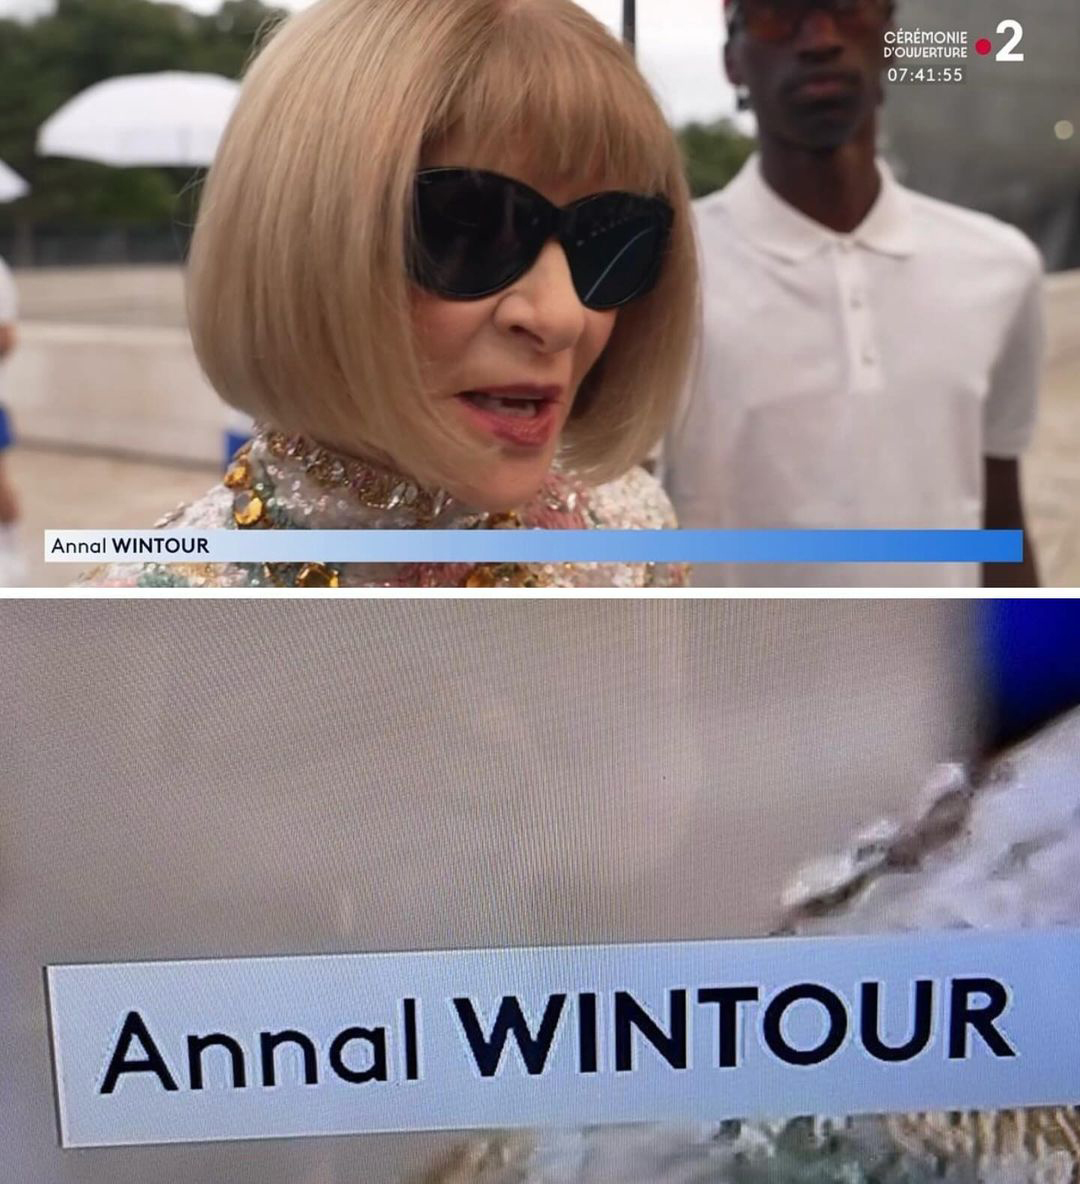 The spelling of Anna's name was seemingly butchered during her interview with a French television network